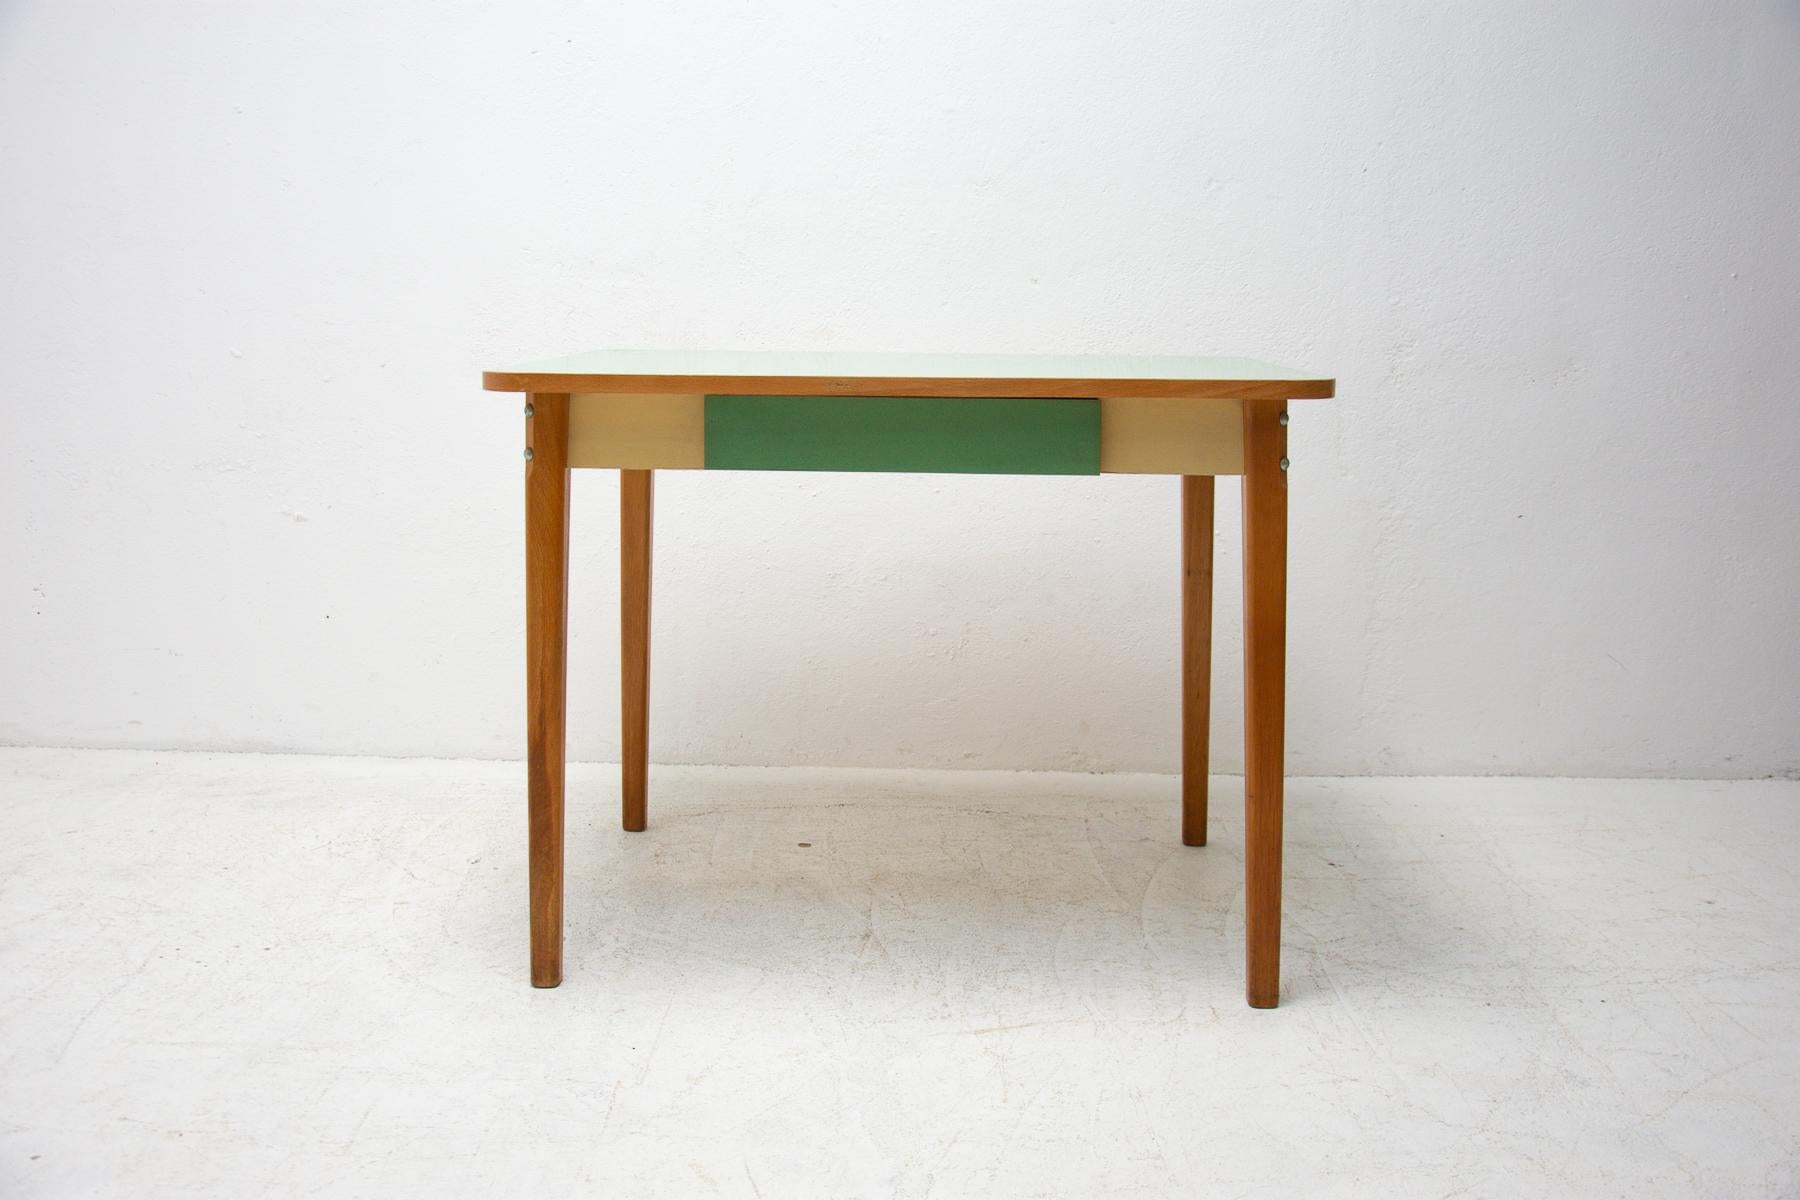 Mid century dining table with a formica plate, beech legs and one drawer. It was made in the former Czechoslovakia in the 1960´s. In very good vintage condition.